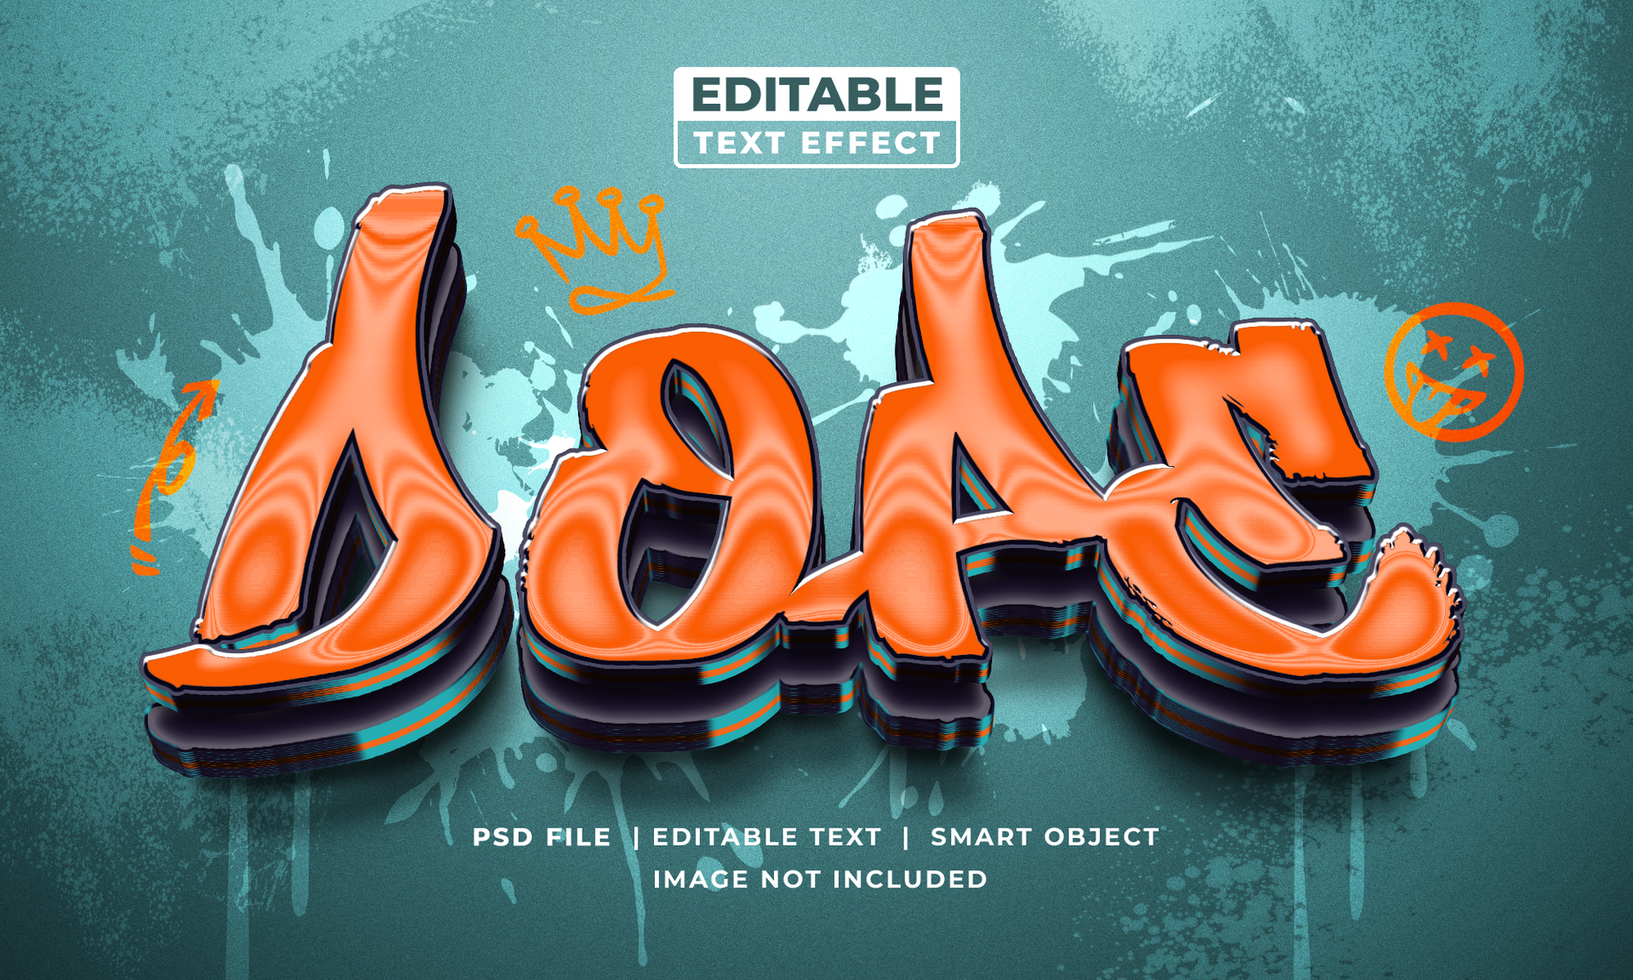 Dope graffity editable text effect style psd